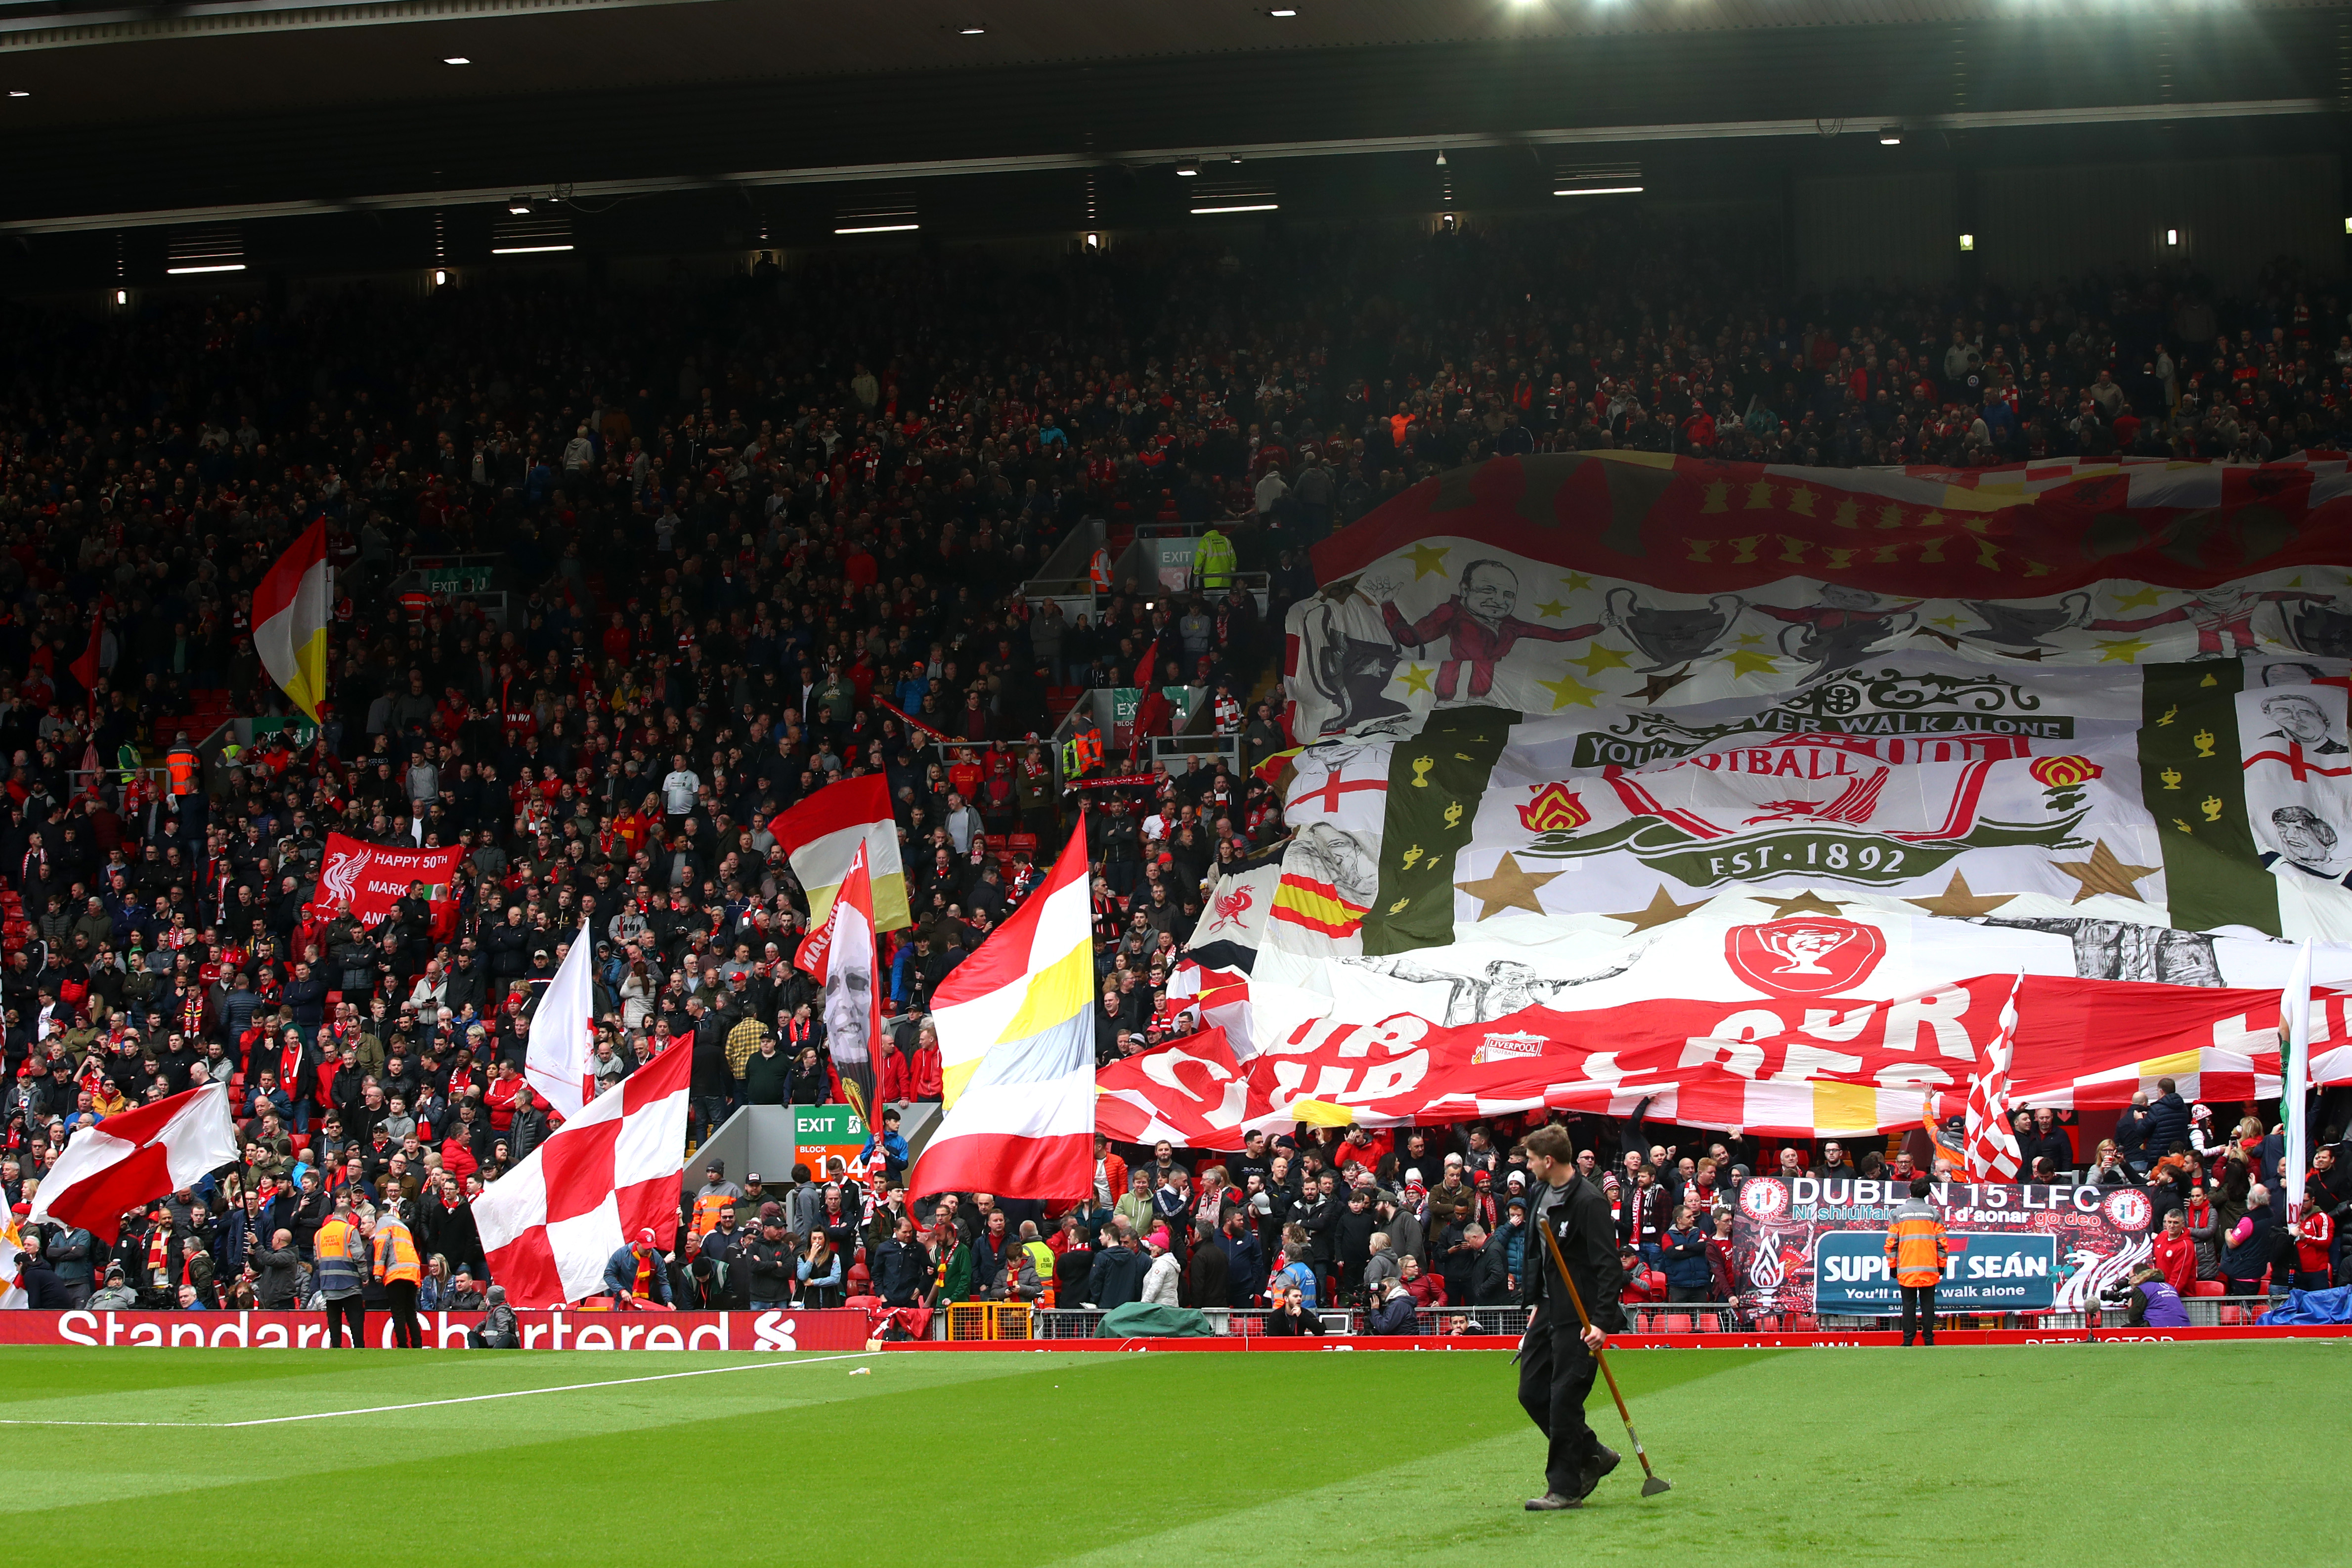 LIVERPOOL, ENGLAND - MARCH 31:  Fans show their support during the Premier League match between Liverpool FC and Tottenham Hotspur at Anfield on March 31, 2019 in Liverpool, United Kingdom. (Photo by Clive Brunskill/Getty Images)